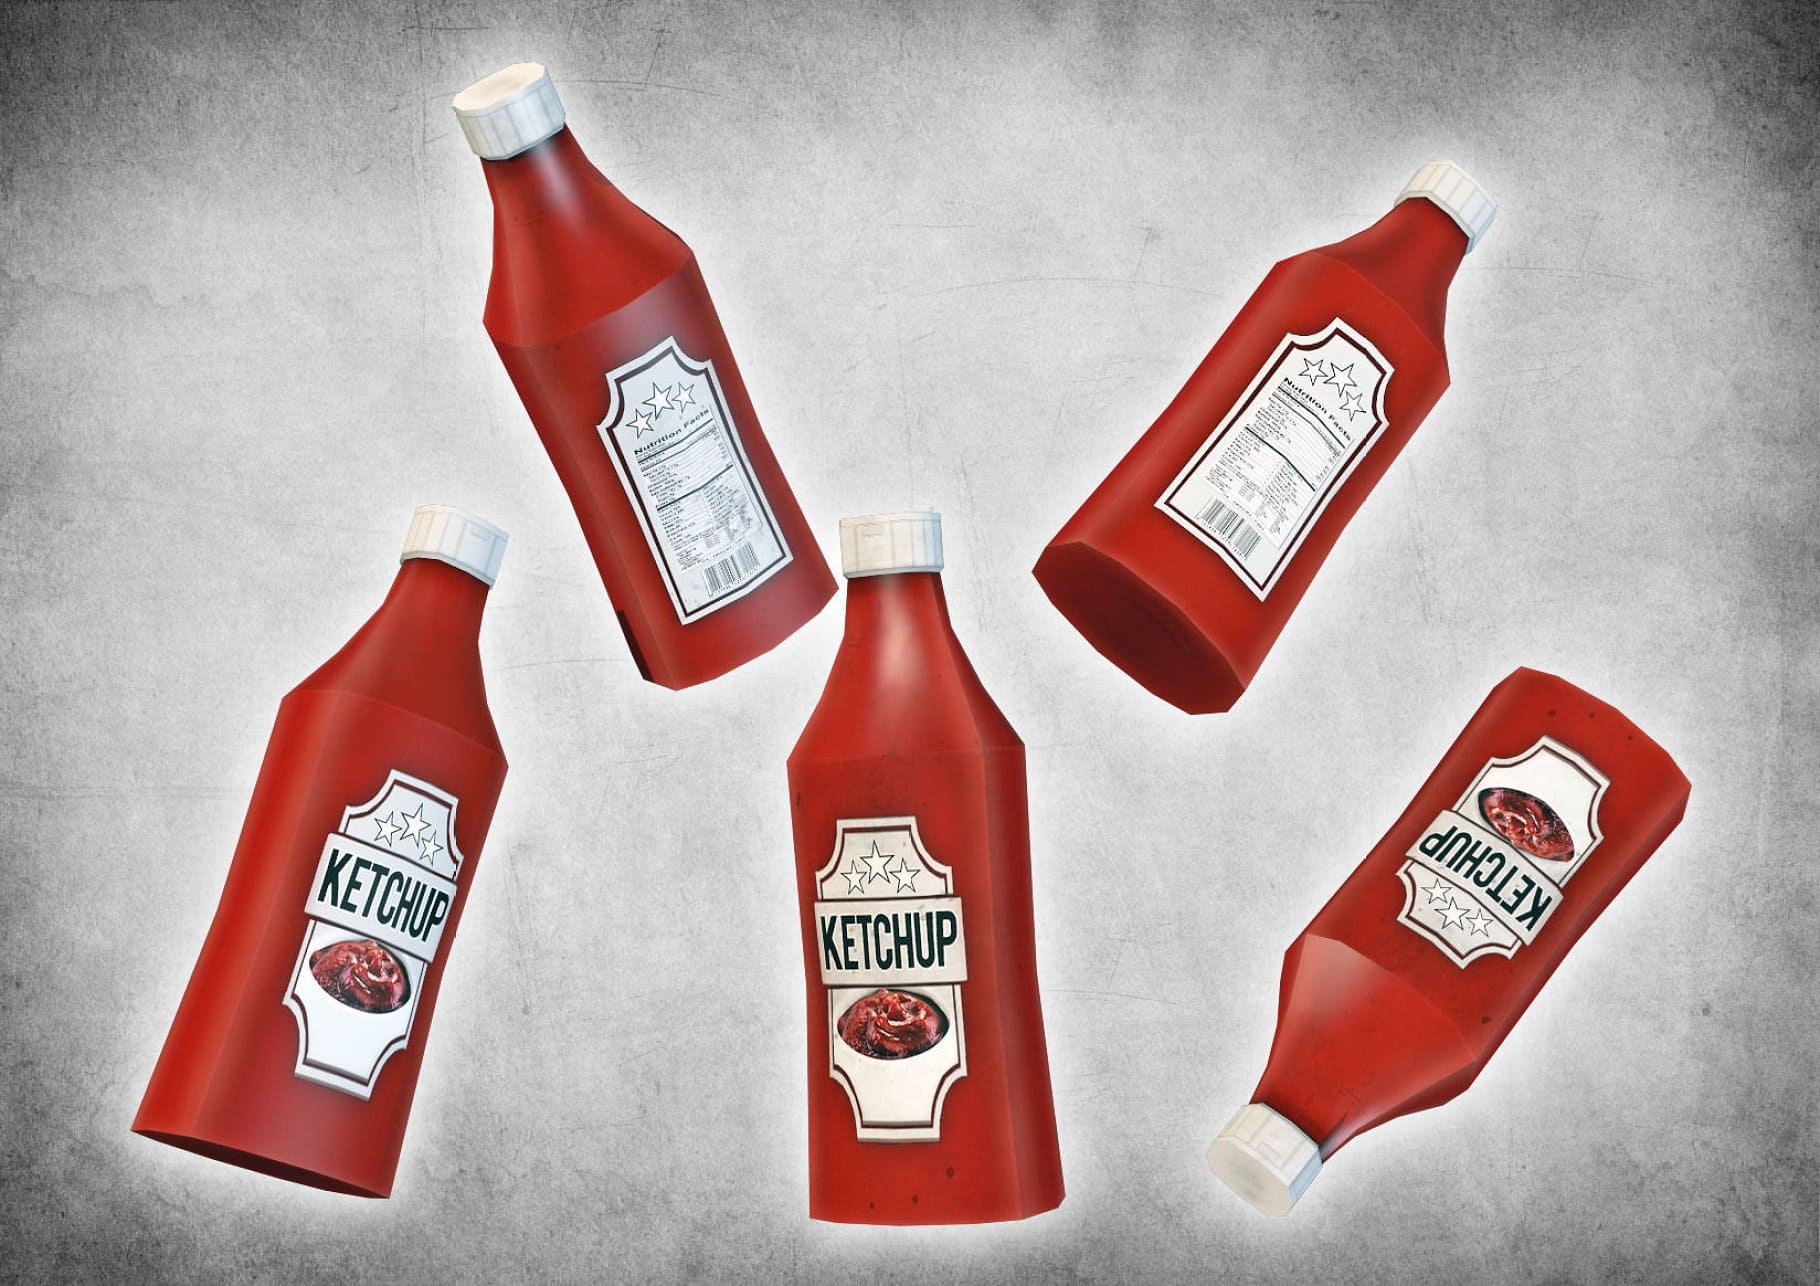 Several cans of ketchup on a gray background.